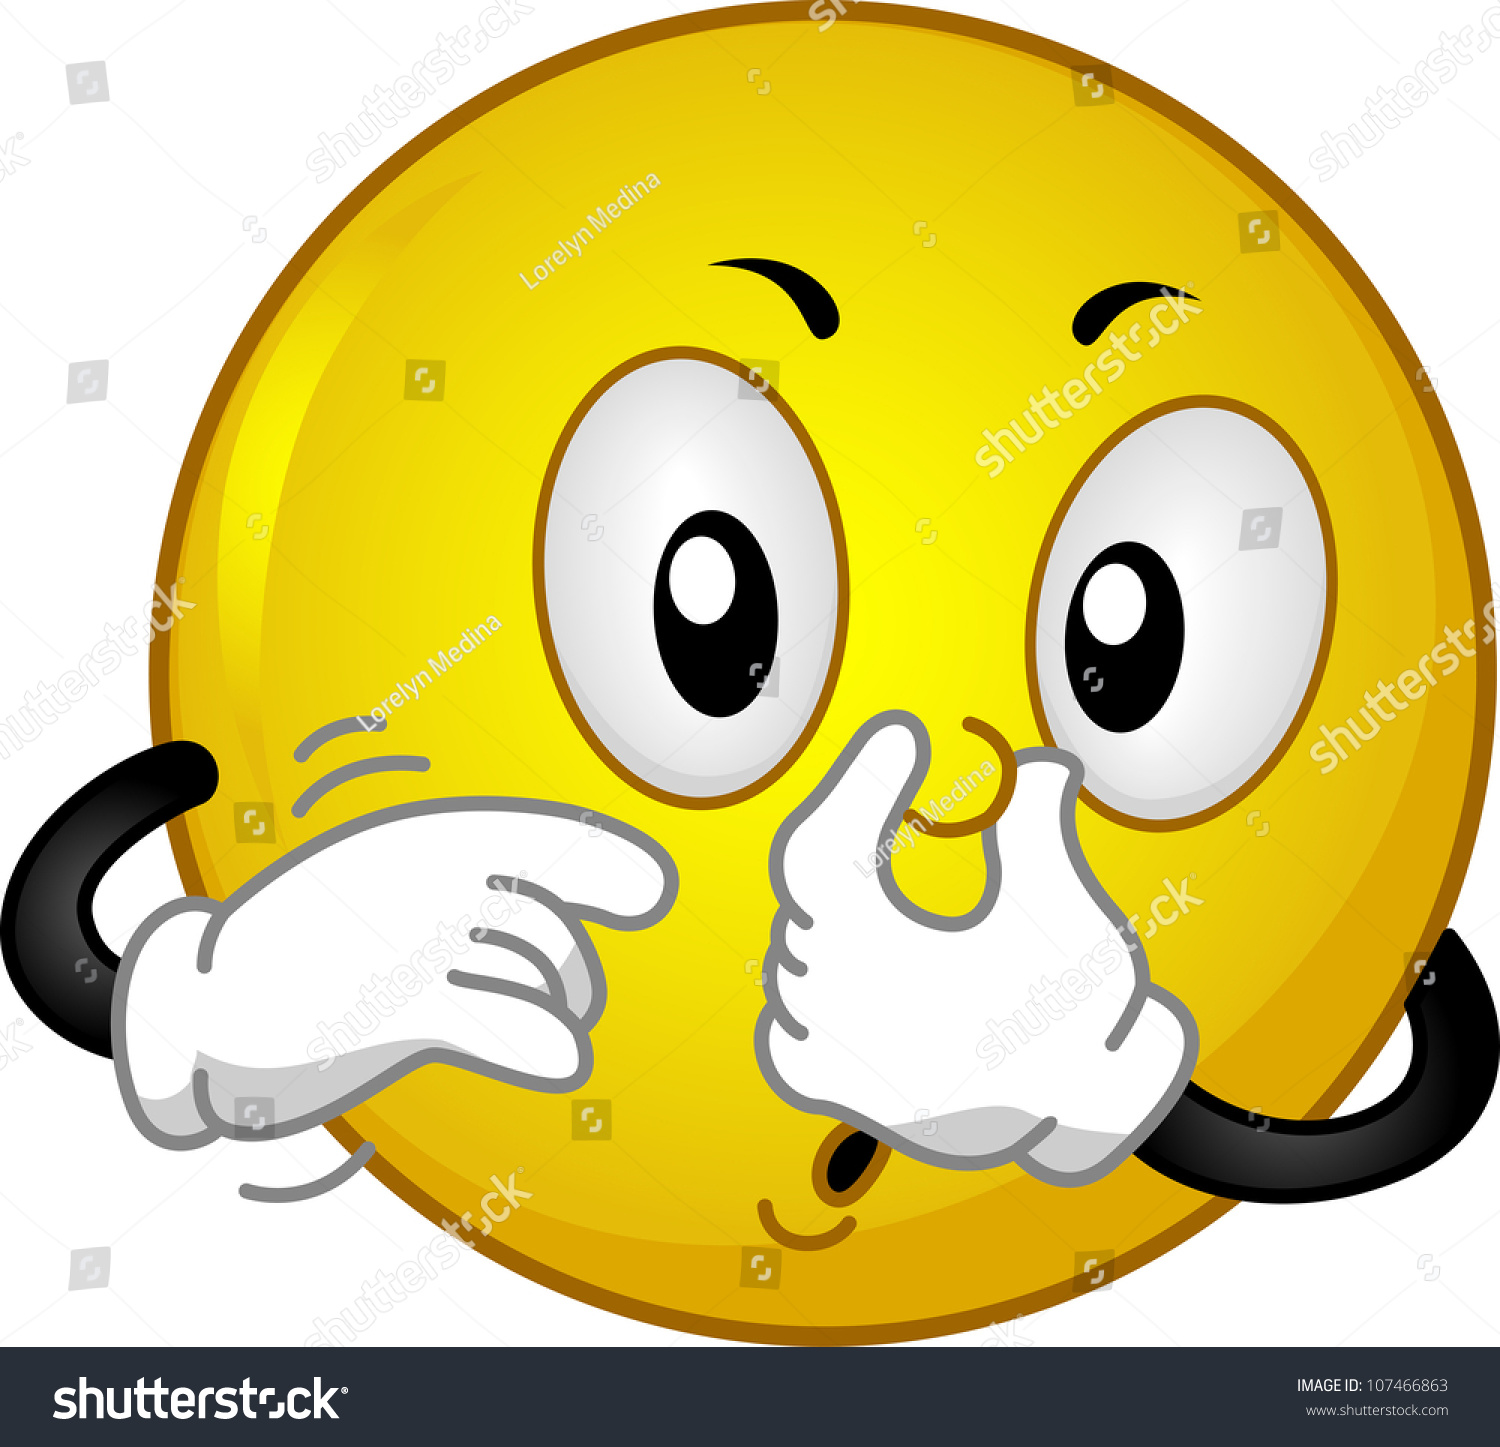 stock-vector-illustration-featuring-a-smiley-covering-its-nose-107466863.jpg